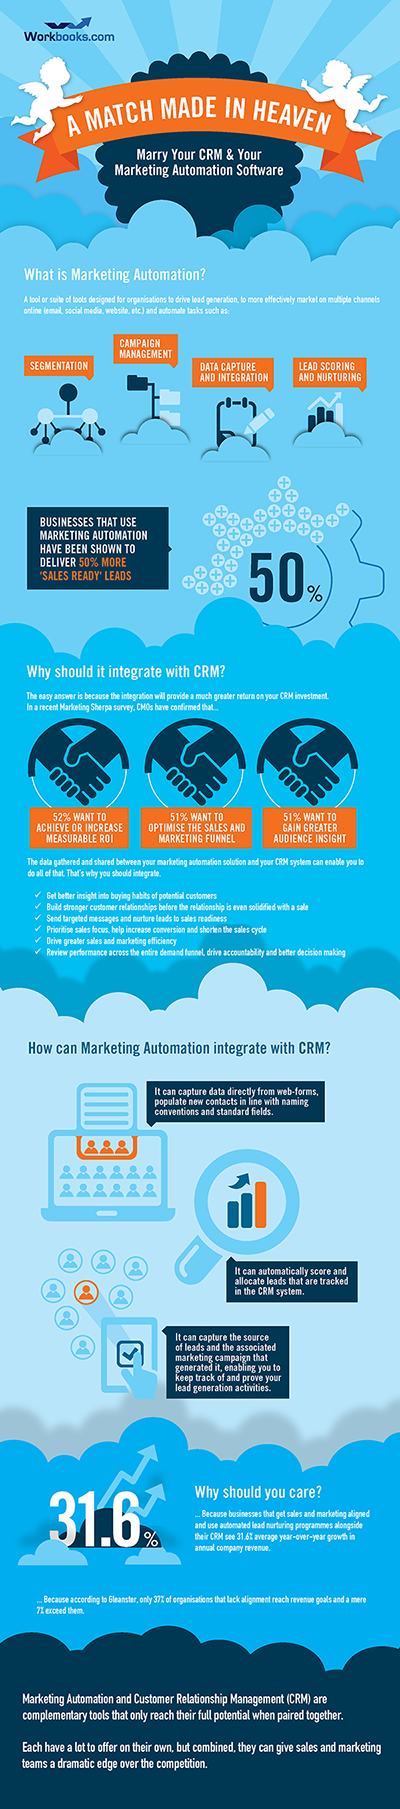 A Match Made in Heaven: Marry Your CRM and Your Marketing Automation Software